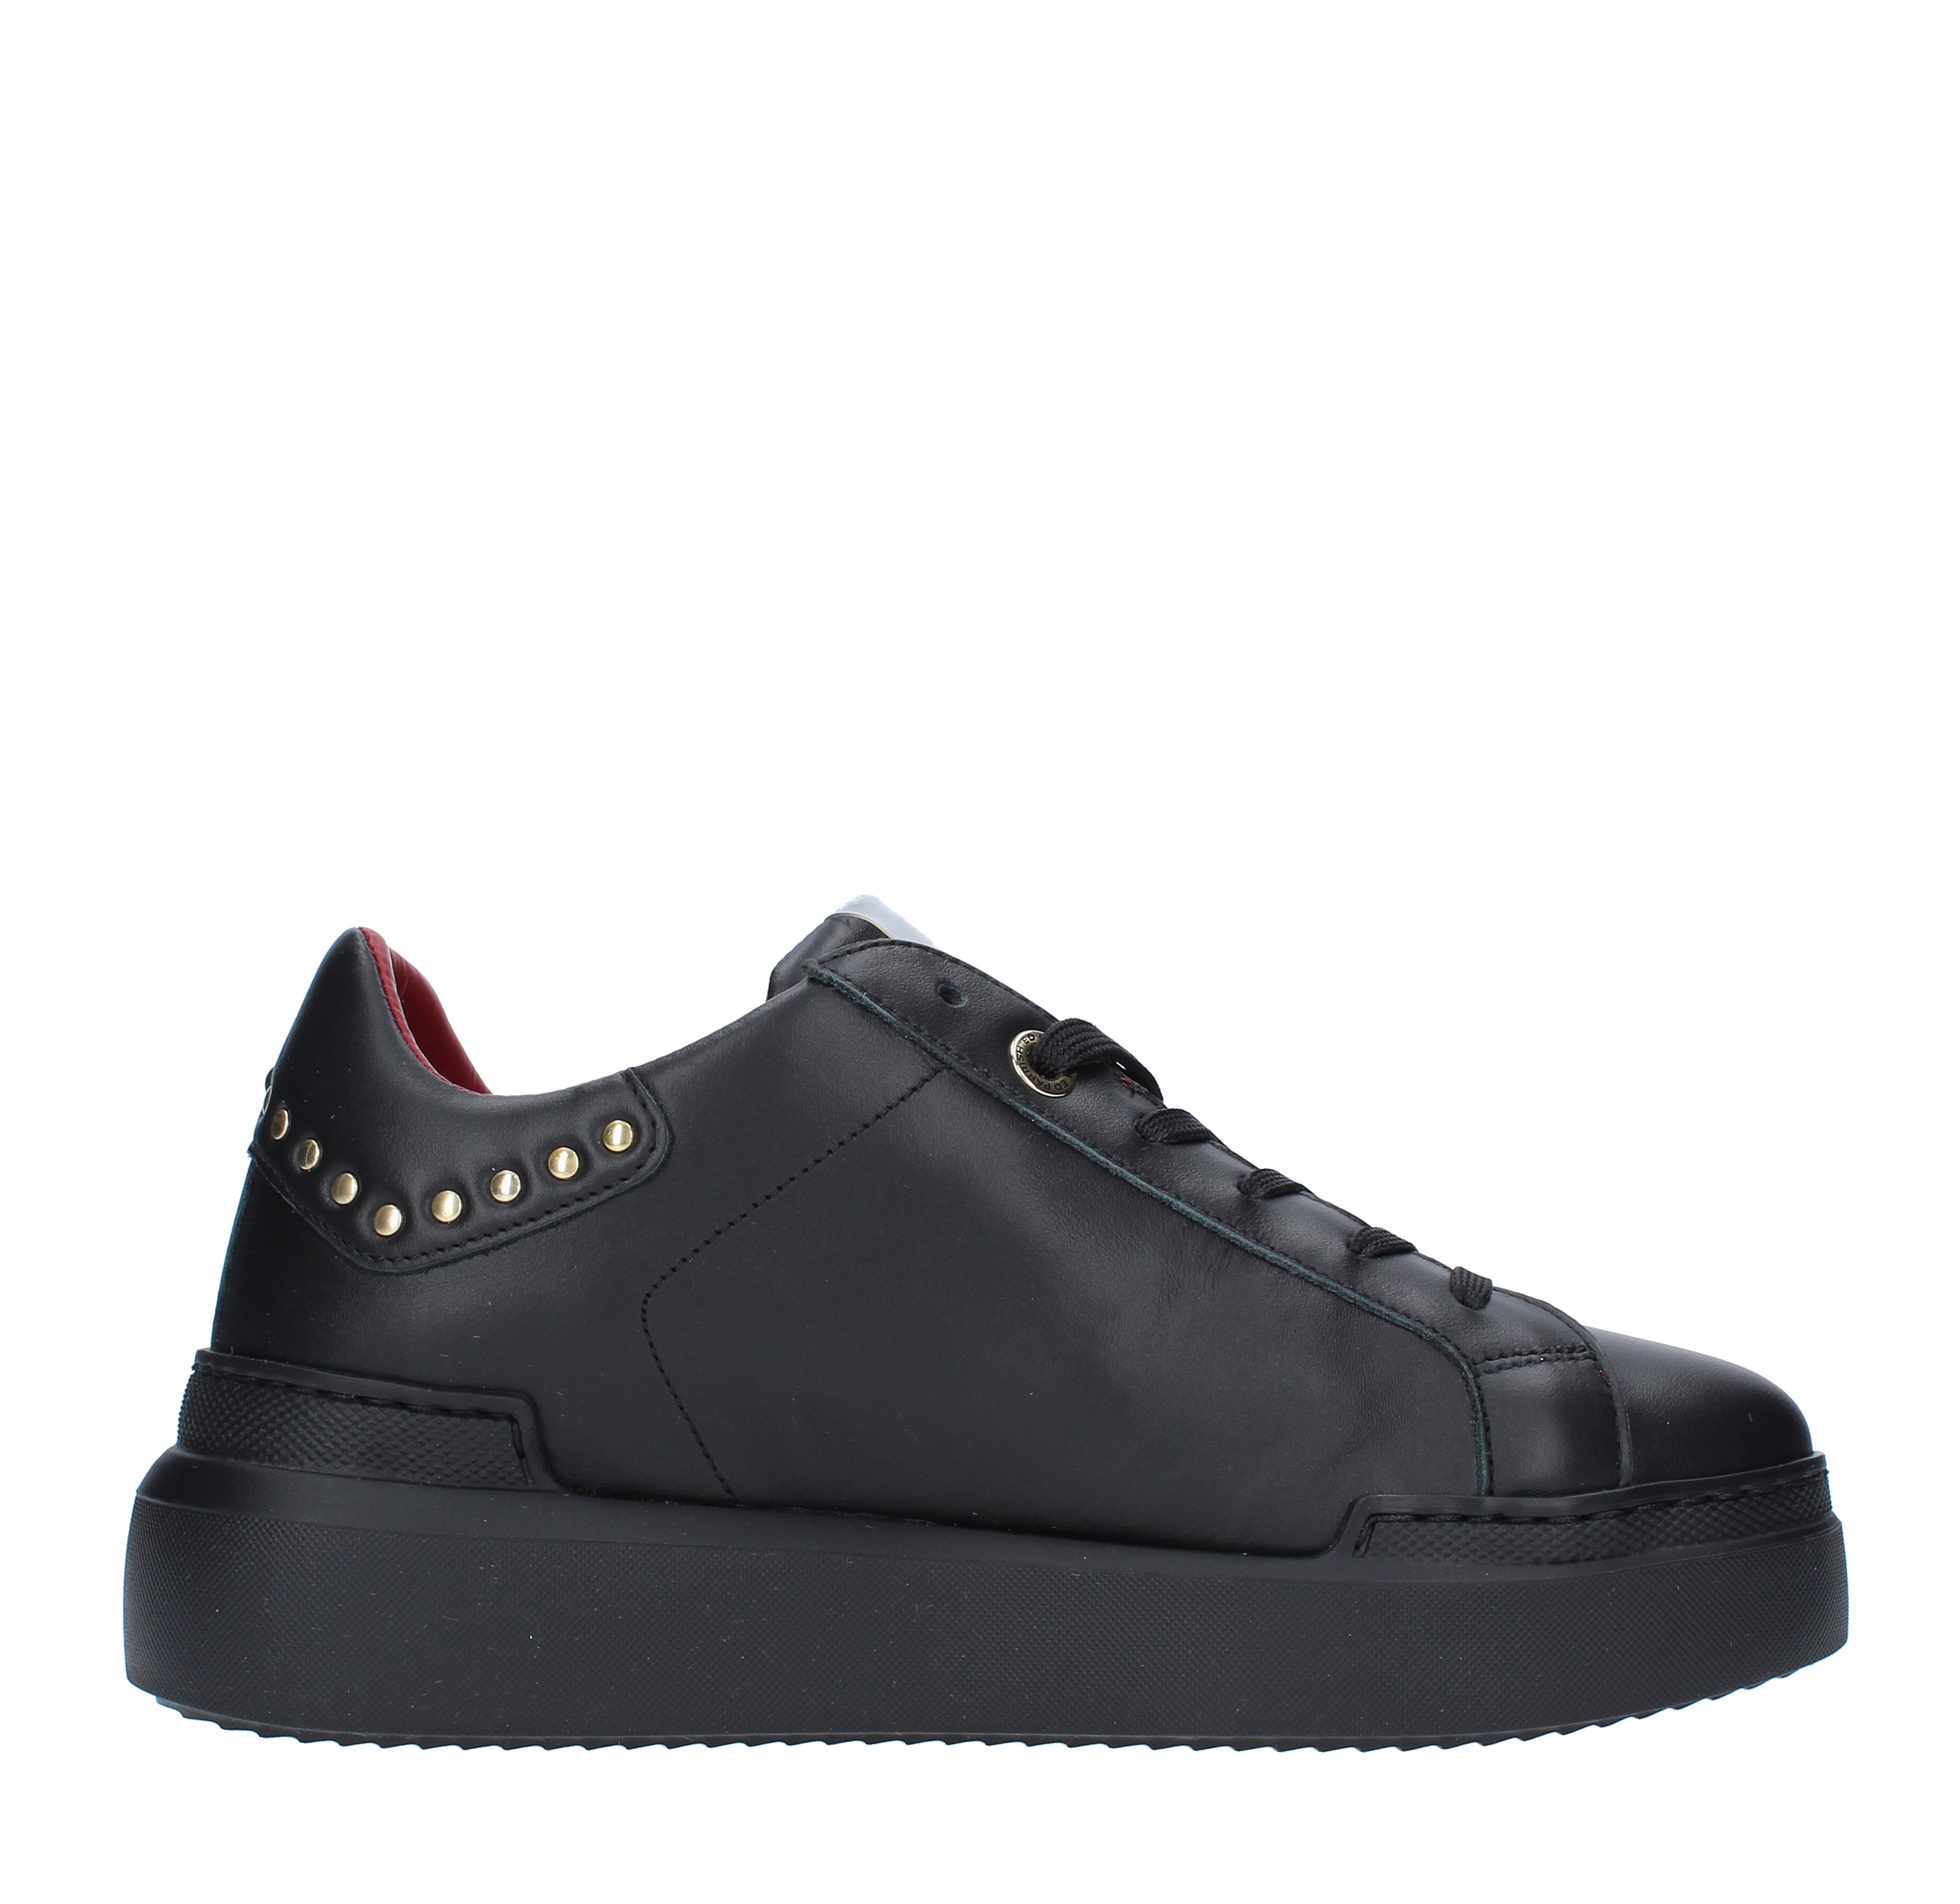 Studded leather sneakers - ED PARRISH - Ginevra calzature